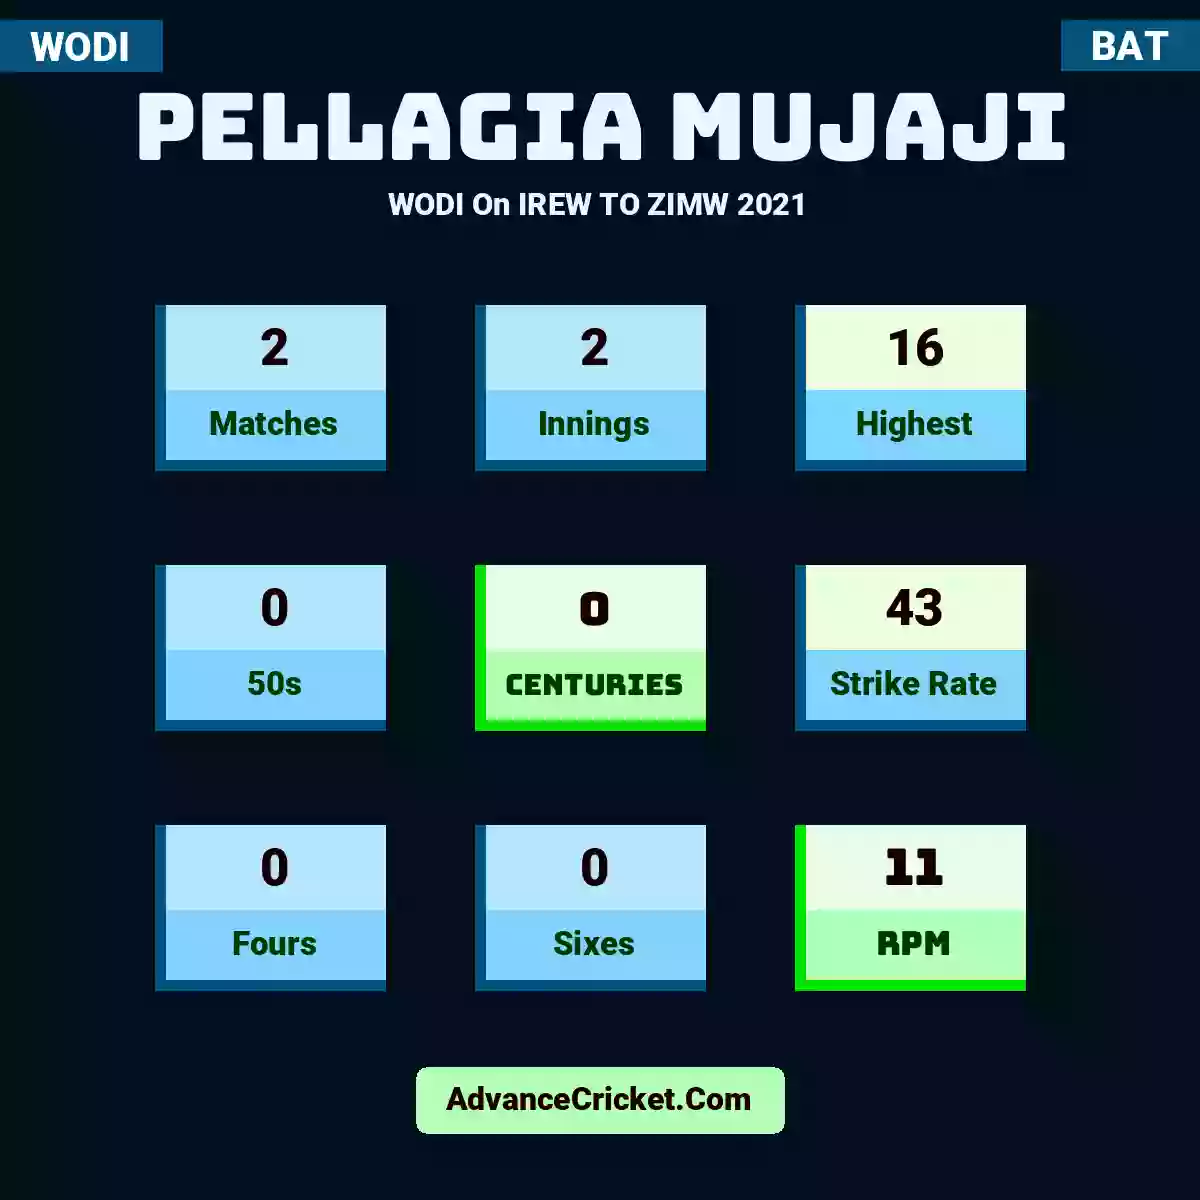 Pellagia Mujaji WODI  On IREW TO ZIMW 2021, Pellagia Mujaji played 2 matches, scored 16 runs as highest, 0 half-centuries, and 0 centuries, with a strike rate of 43. P.Mujaji hit 0 fours and 0 sixes, with an RPM of 11.